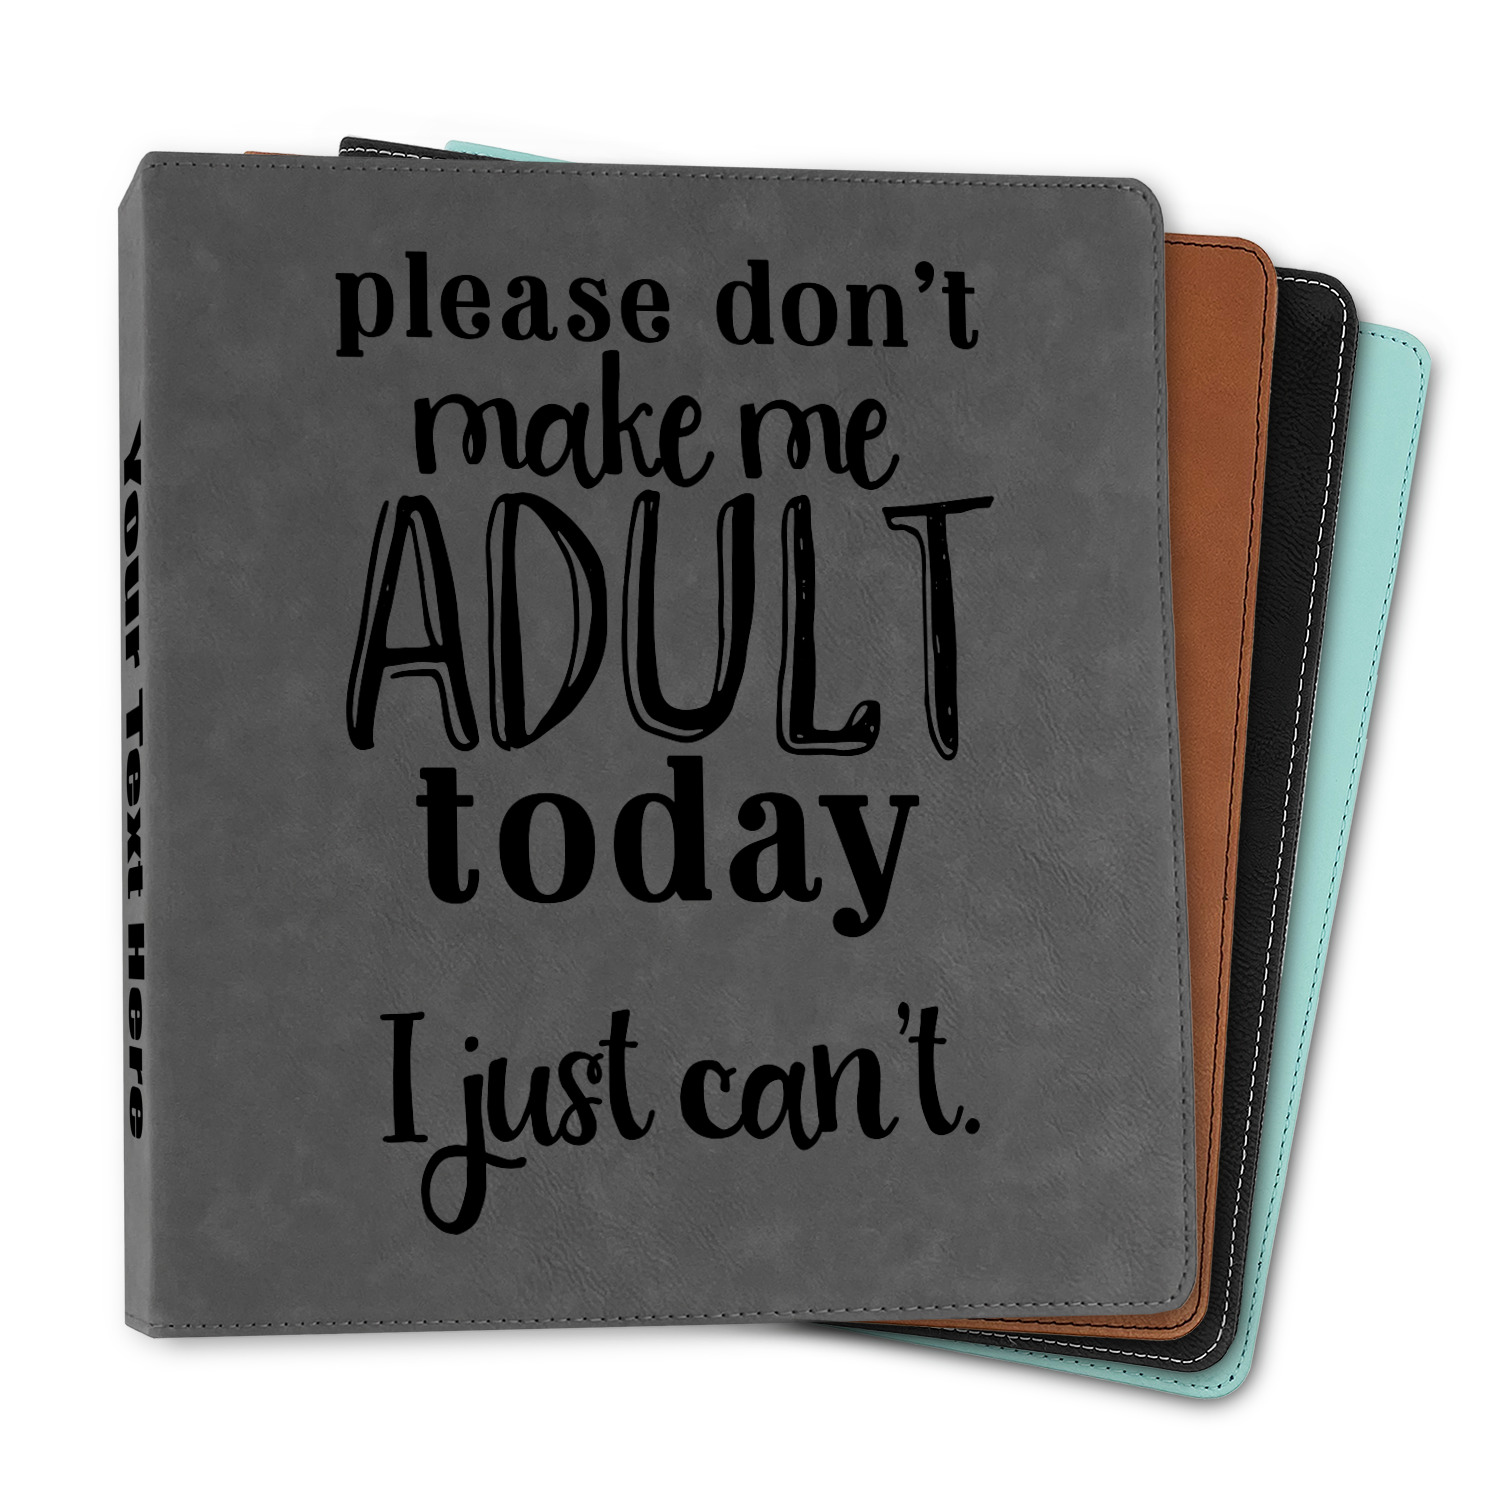 Funny Quotes and Sayings Leather Binder - 1